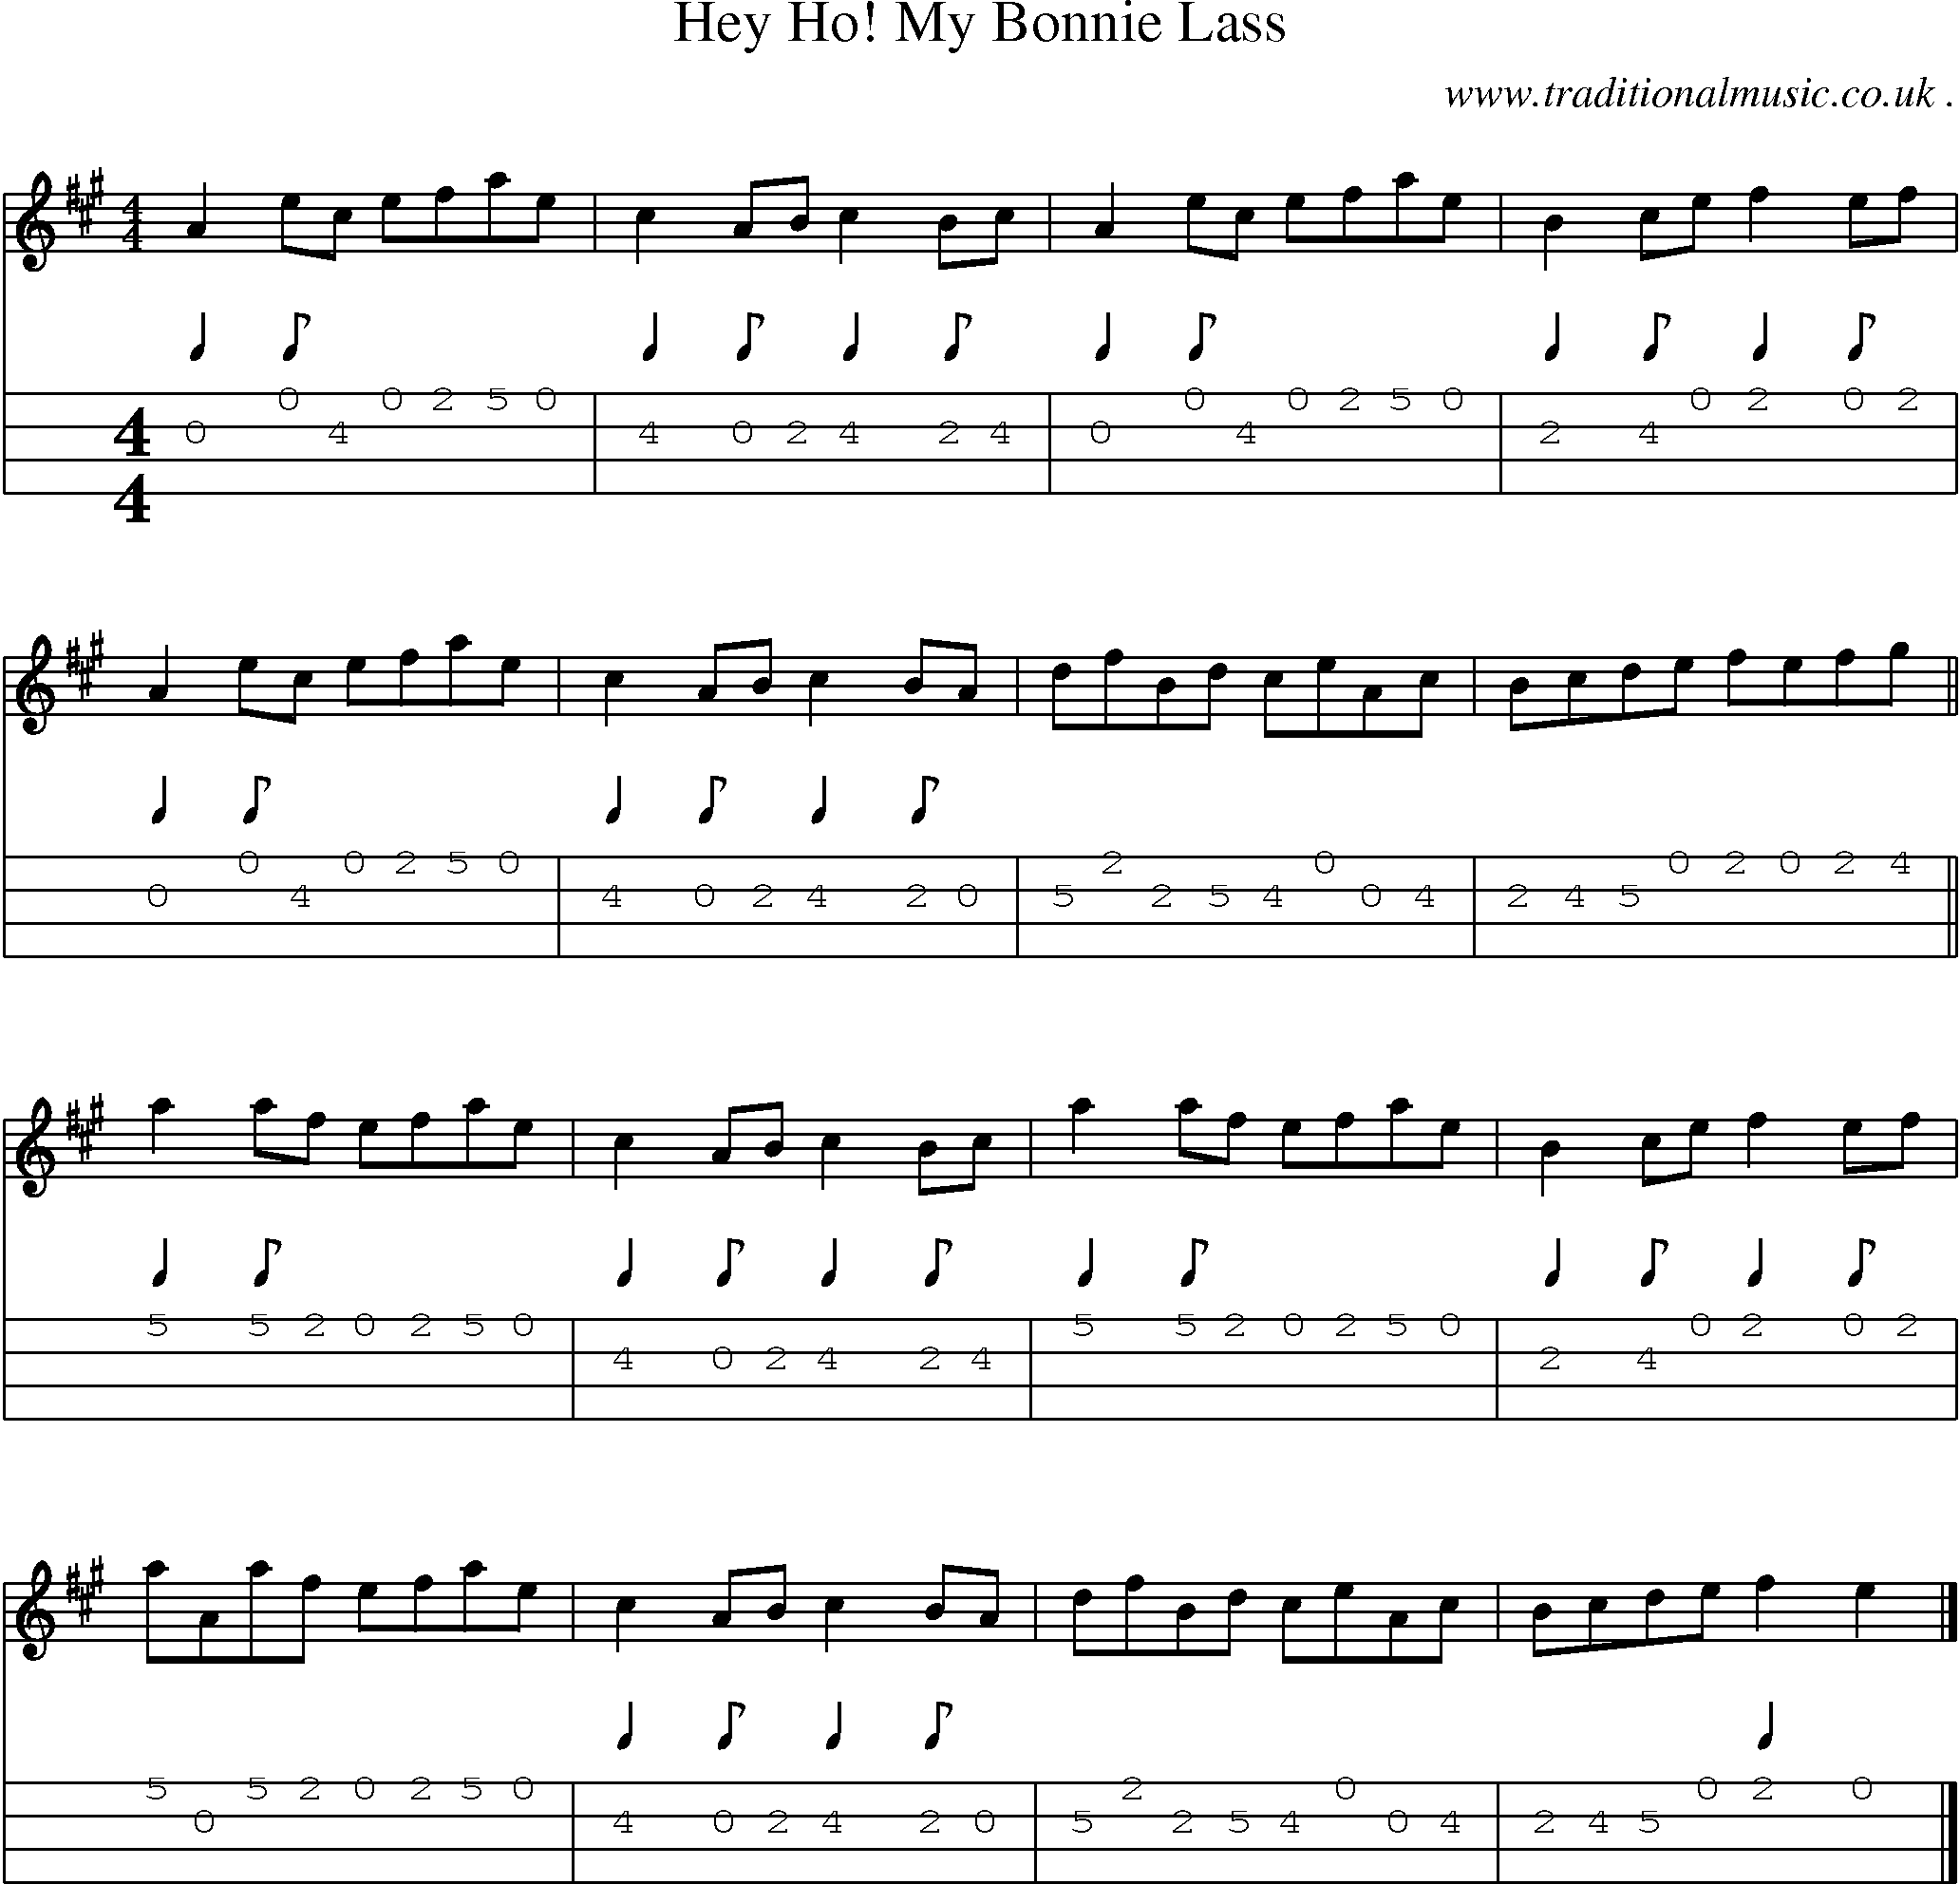 Sheet-music  score, Chords and Mandolin Tabs for Hey Ho! My Bonnie Lass